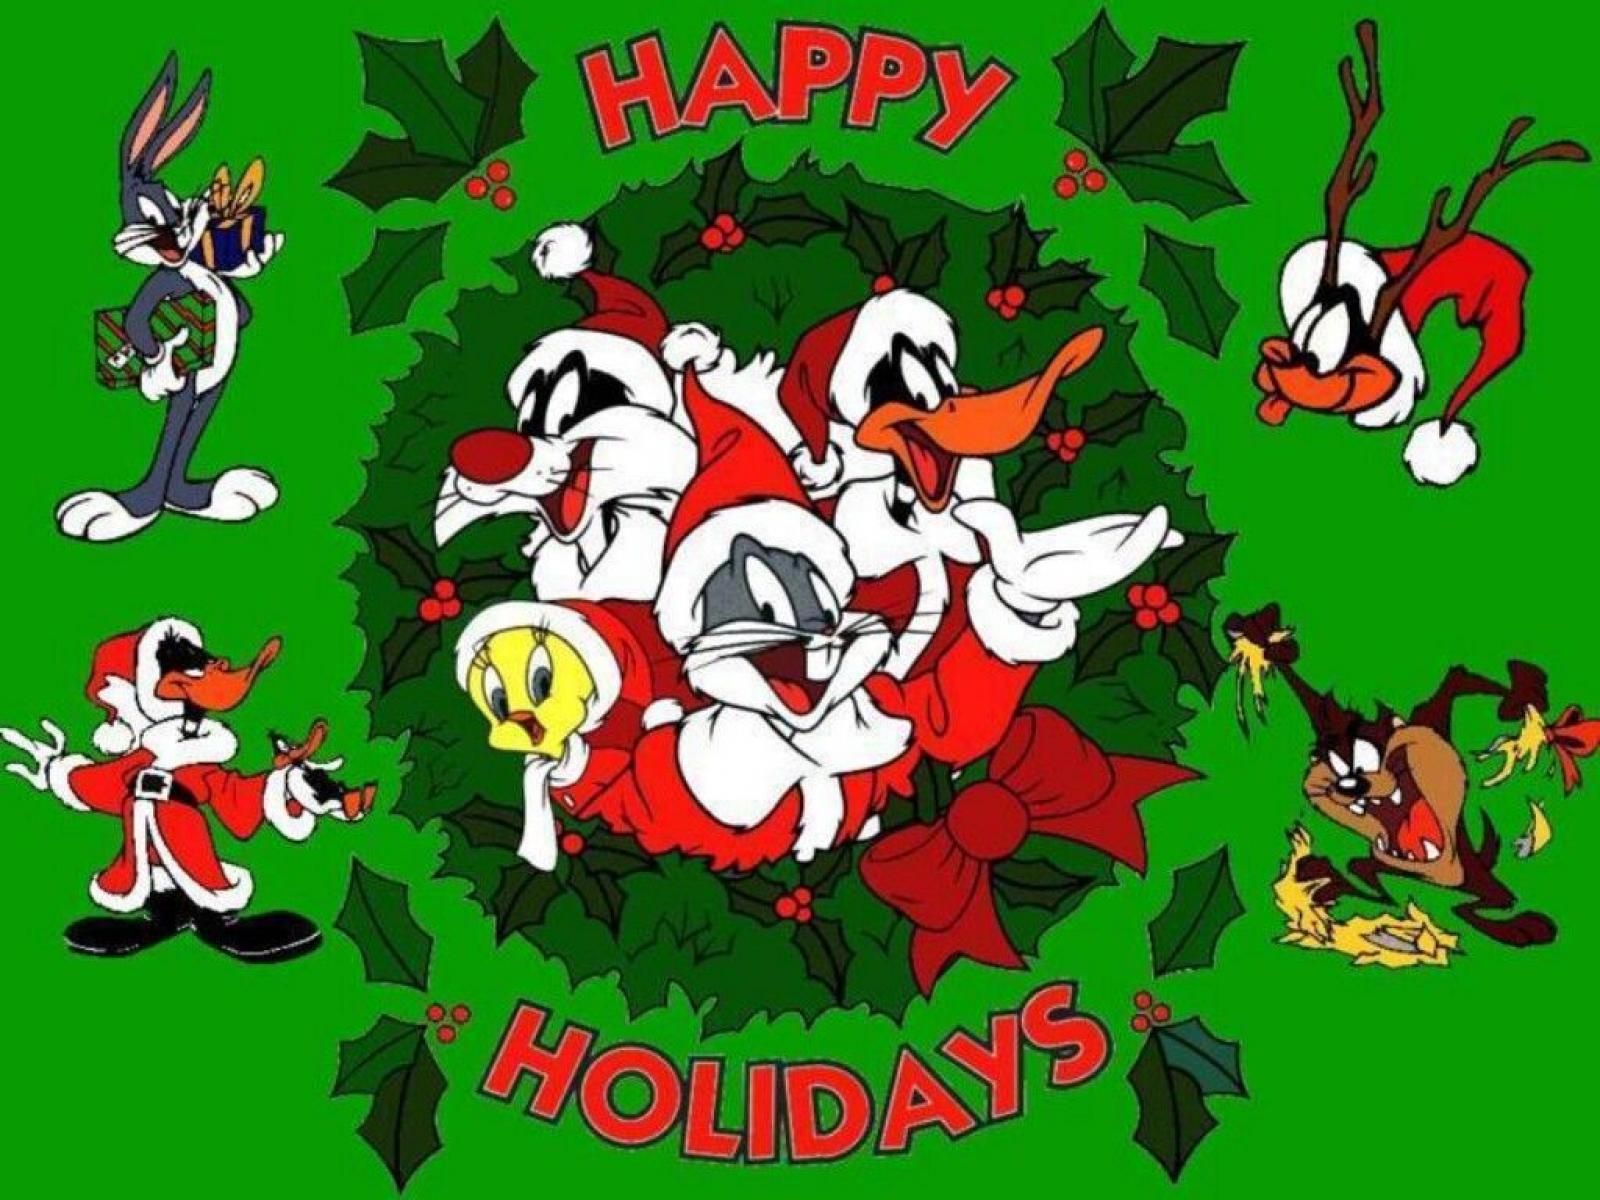 bugs bunny wallpaper Wallpaper bugs bunny wallpaper Wallpaper & Picture Download. Christmas cartoons, Christmas cartoon characters, Looney tunes